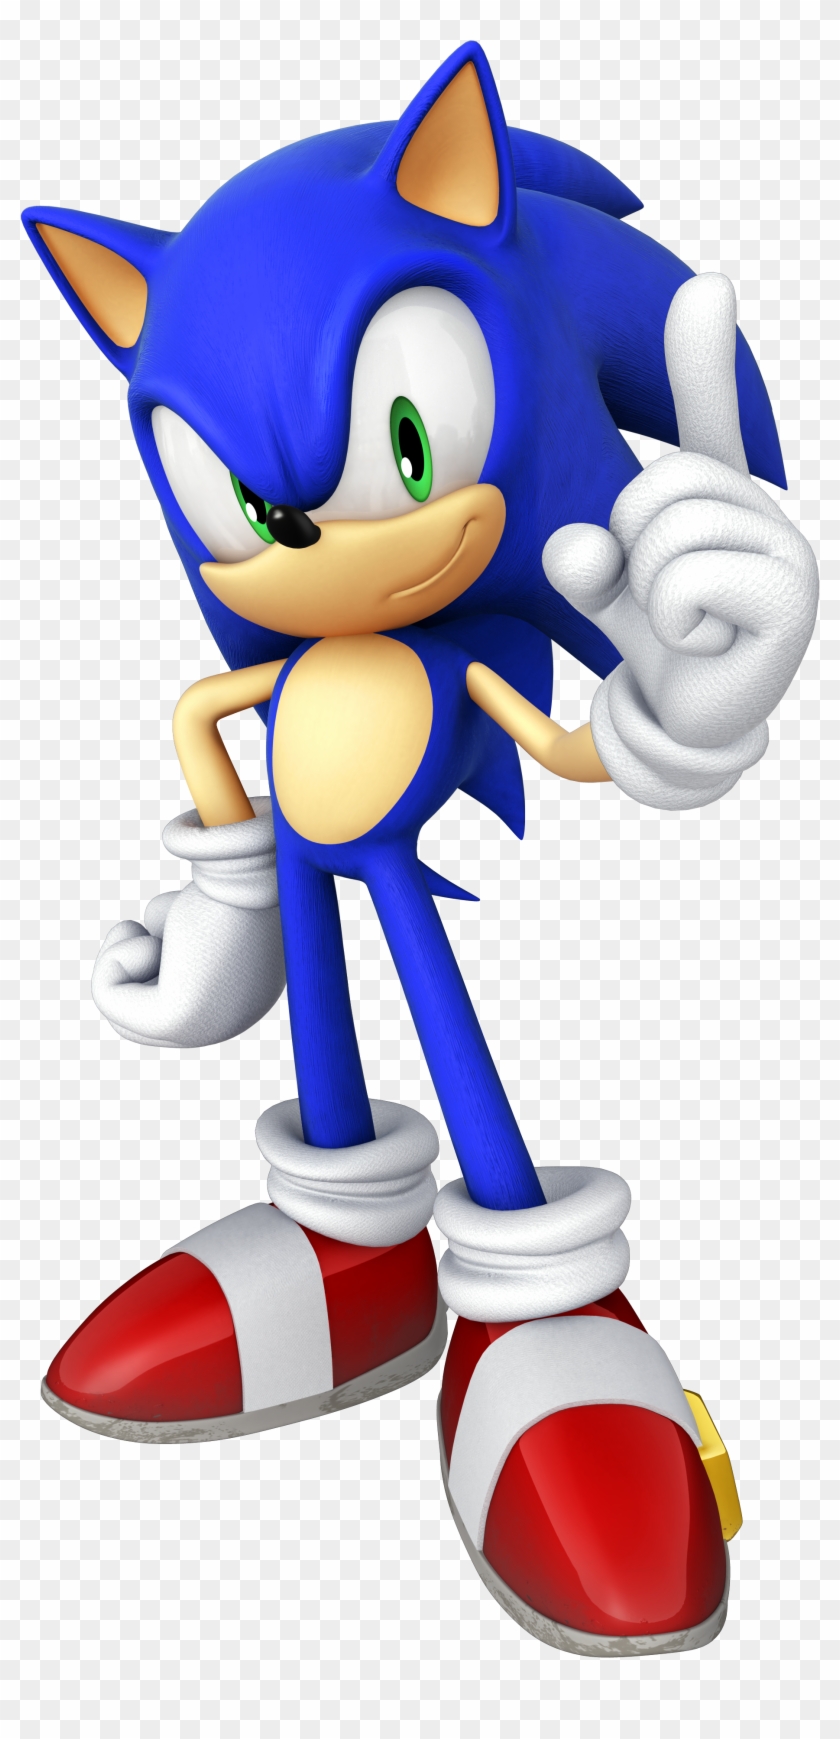 Free Download Of - Sonic The Hedgehog 4 Episode Clipart #1122722